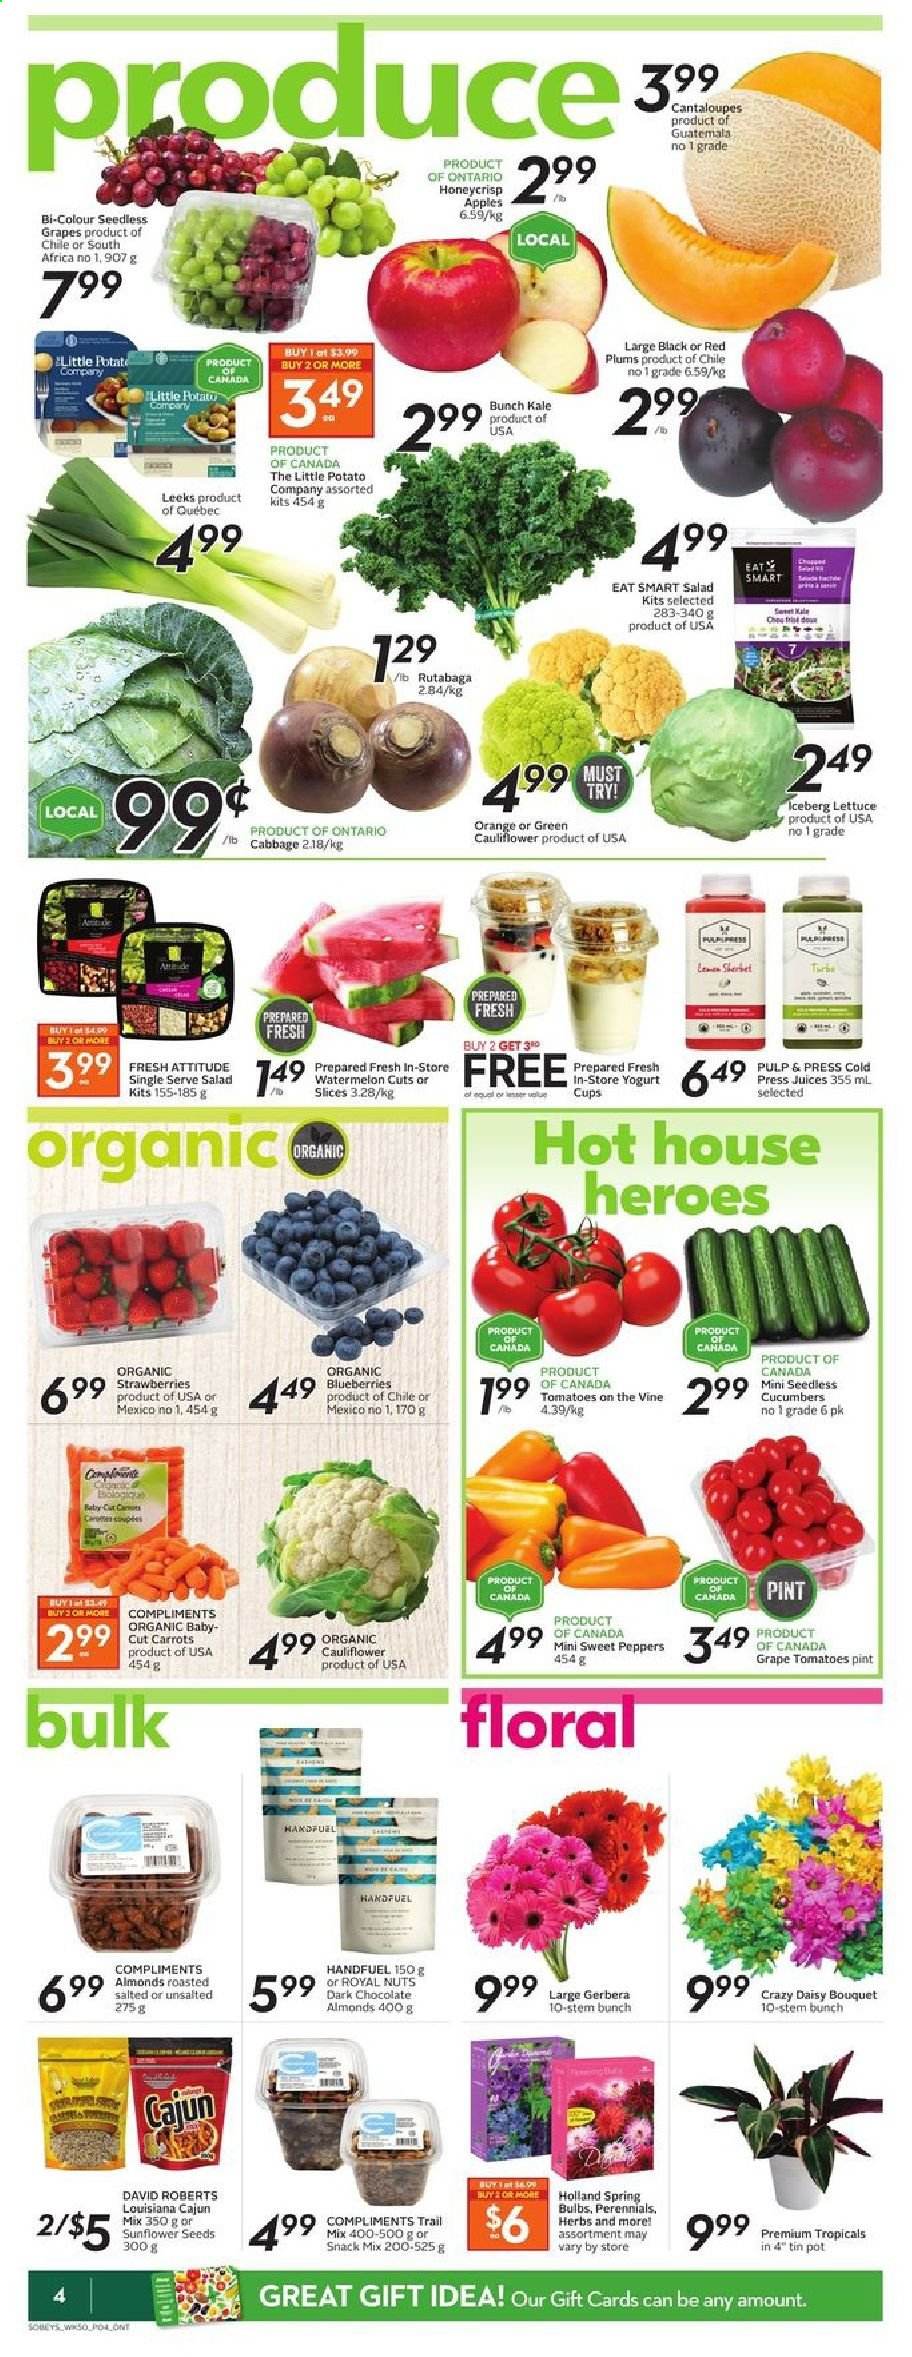 thumbnail - Sobeys Flyer - April 08, 2021 - April 14, 2021 - Sales products - cabbage, cantaloupe, carrots, cauliflower, cucumber, sweet peppers, tomatoes, kale, lettuce, salad, rutabaga, peppers, apples, seedless grapes, strawberries, watermelon, plums, red plums, sherbet, chocolate, dark chocolate, sunflower seeds, trail mix, juice. Page 4.